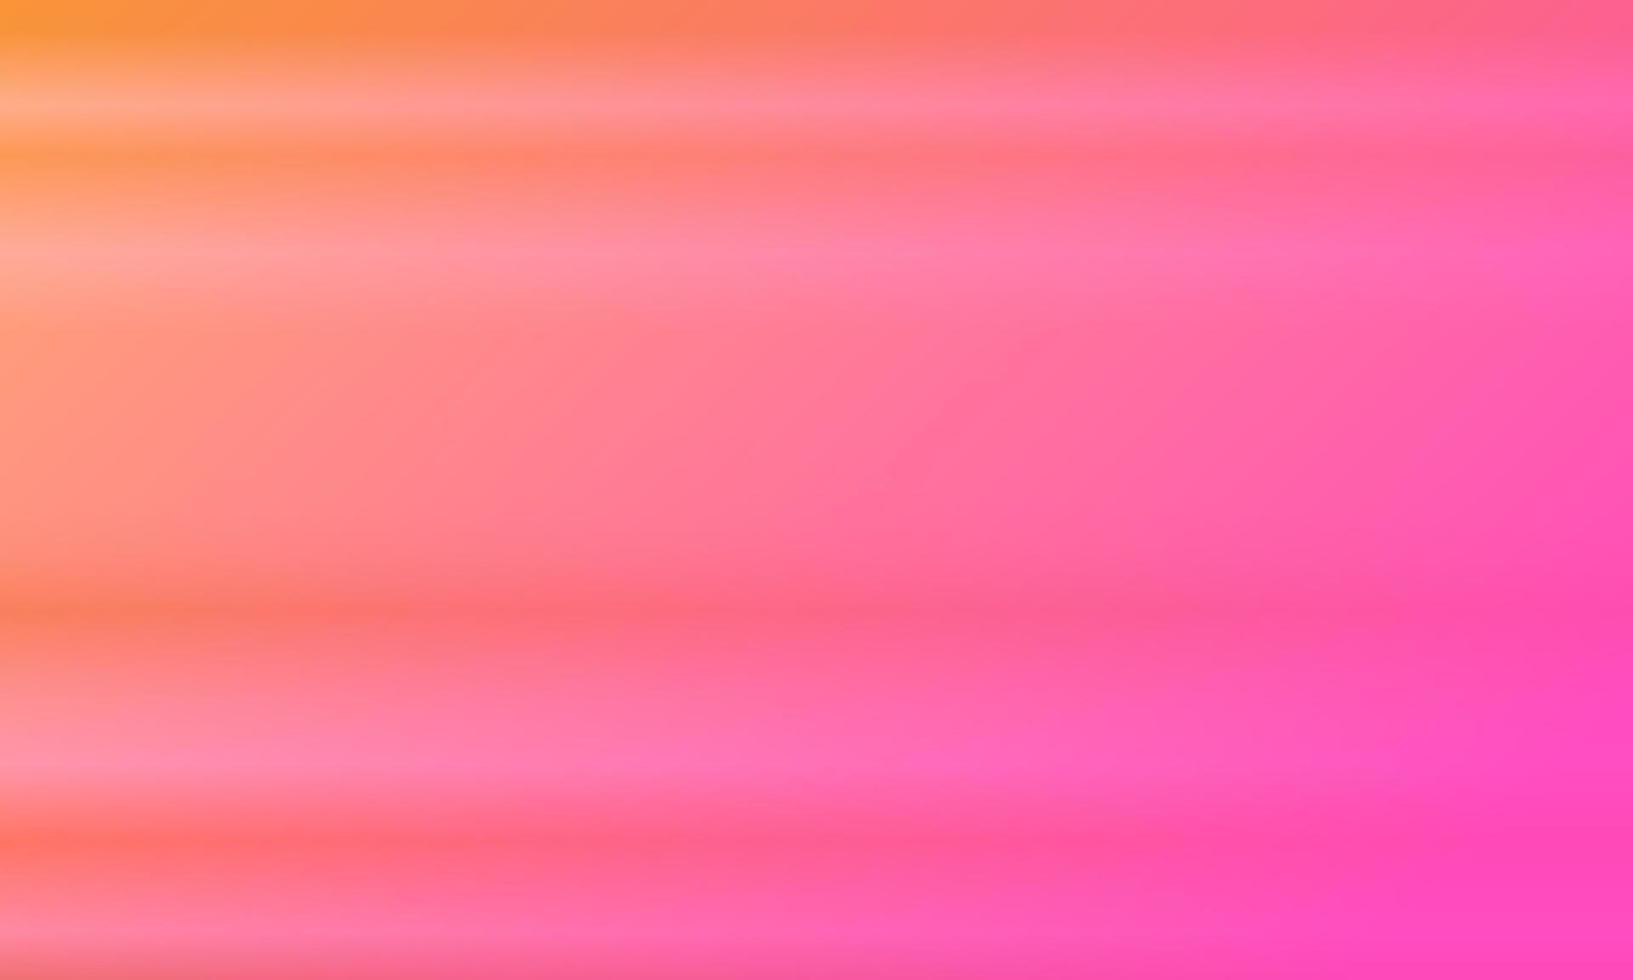 orange and pink horizontal gradient abstract background. shiny, blur, simple, modern and colorful style. great for backdrop, homepage, wallpaper, card, cover, poster, banner or flyer vector